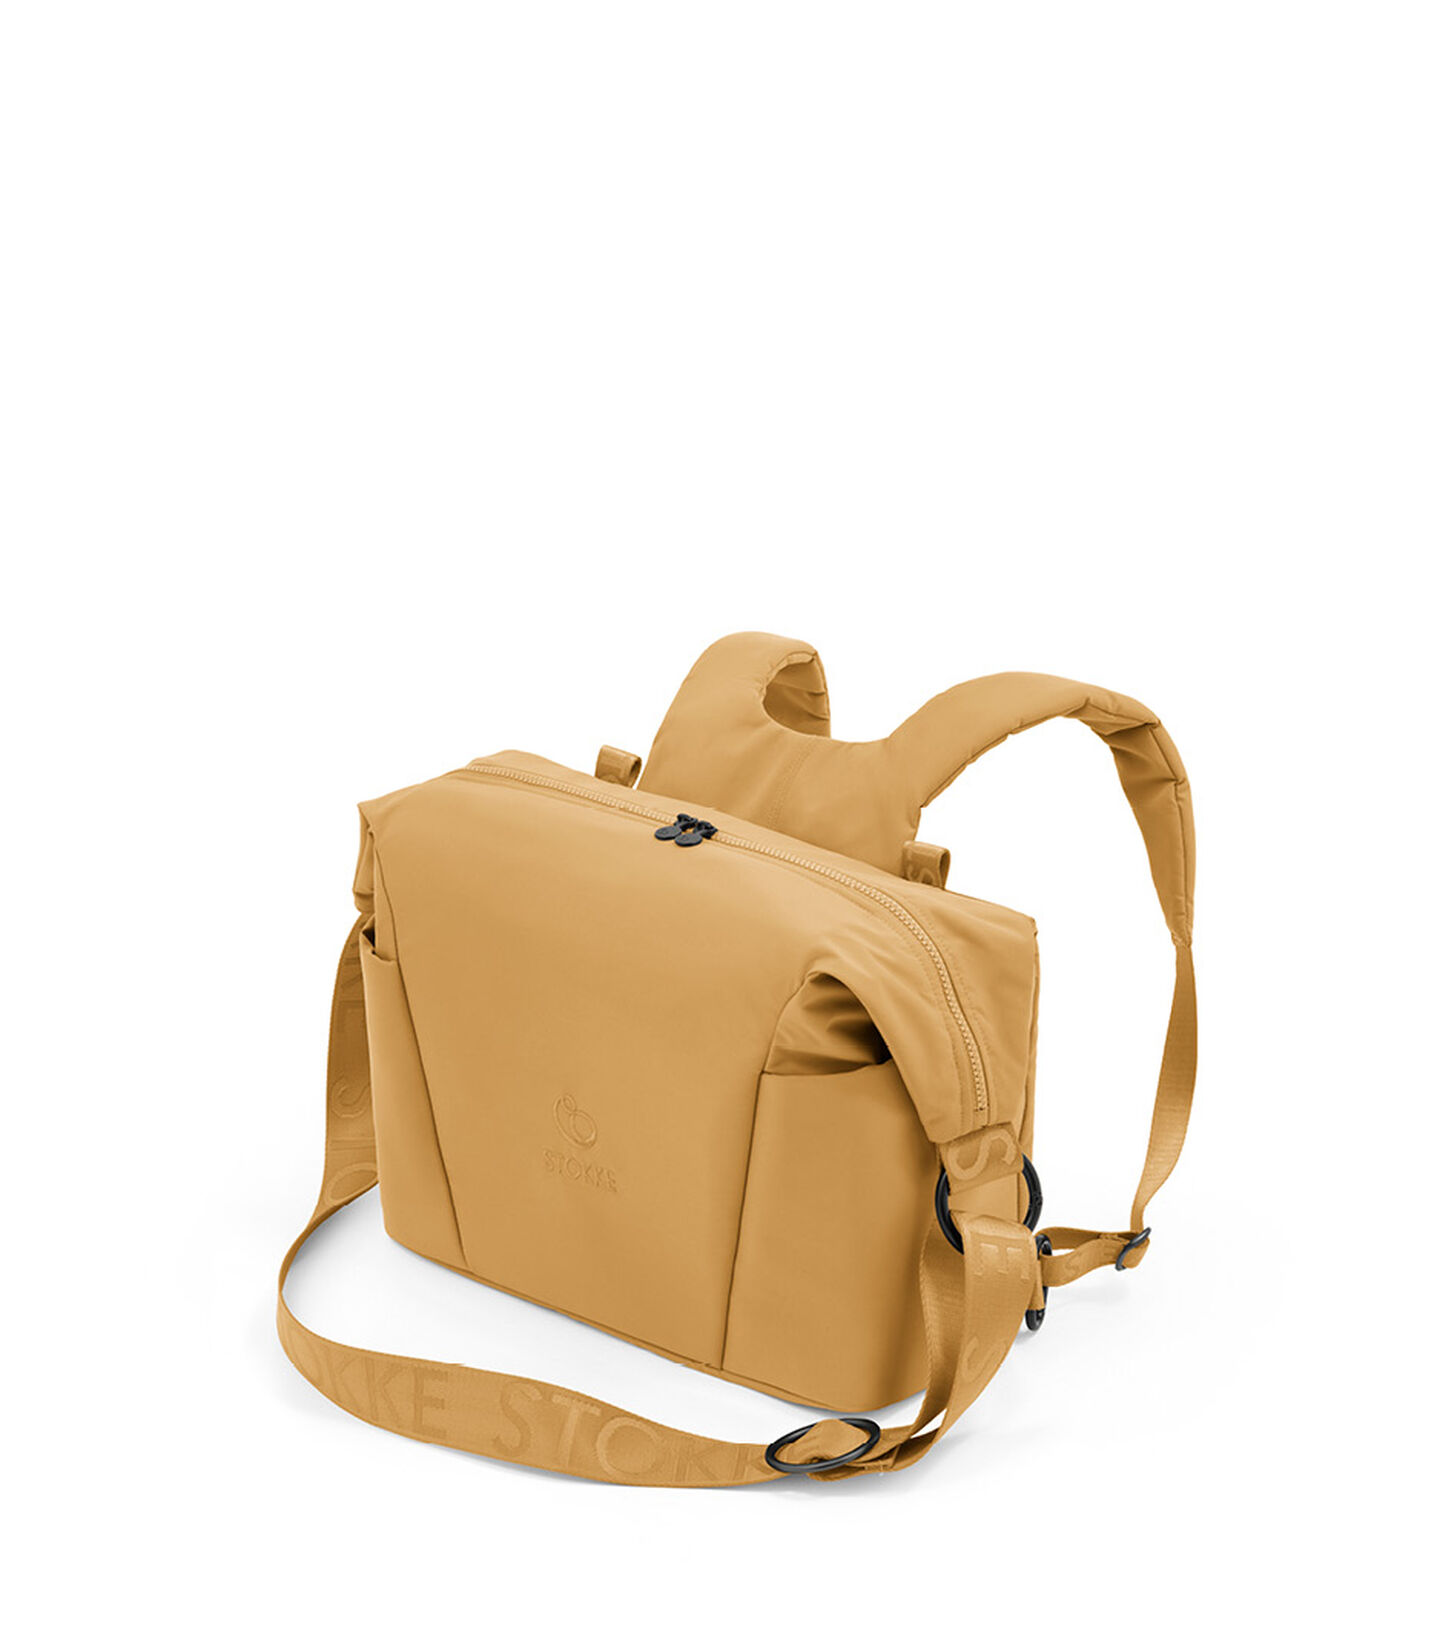 Stokke® Xplory® X Changing bag Golden Yellow, Golden Yellow, mainview view 1